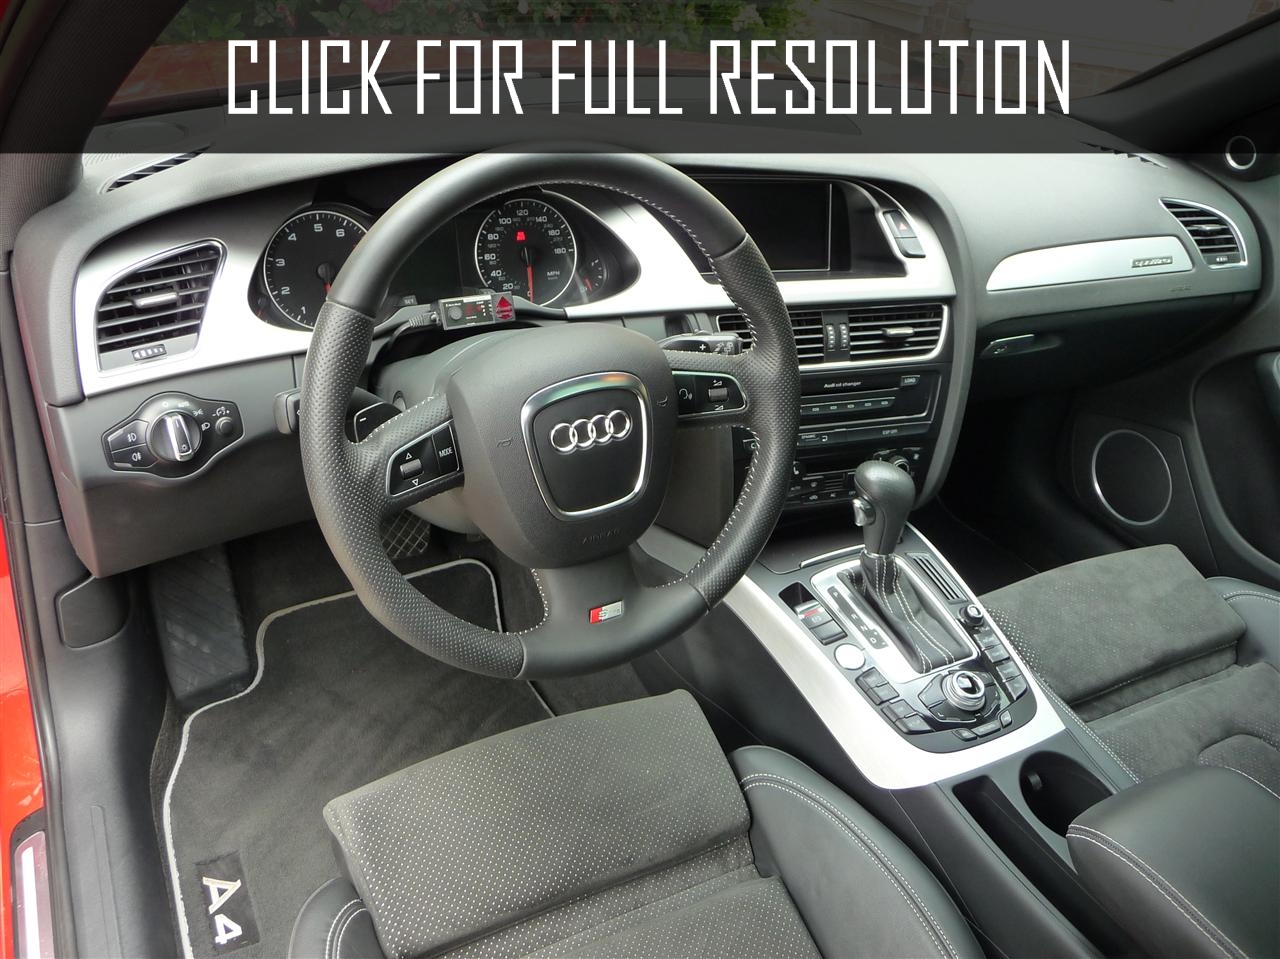 2011 Audi A4 S Line Best Image Gallery 16 20 Share And